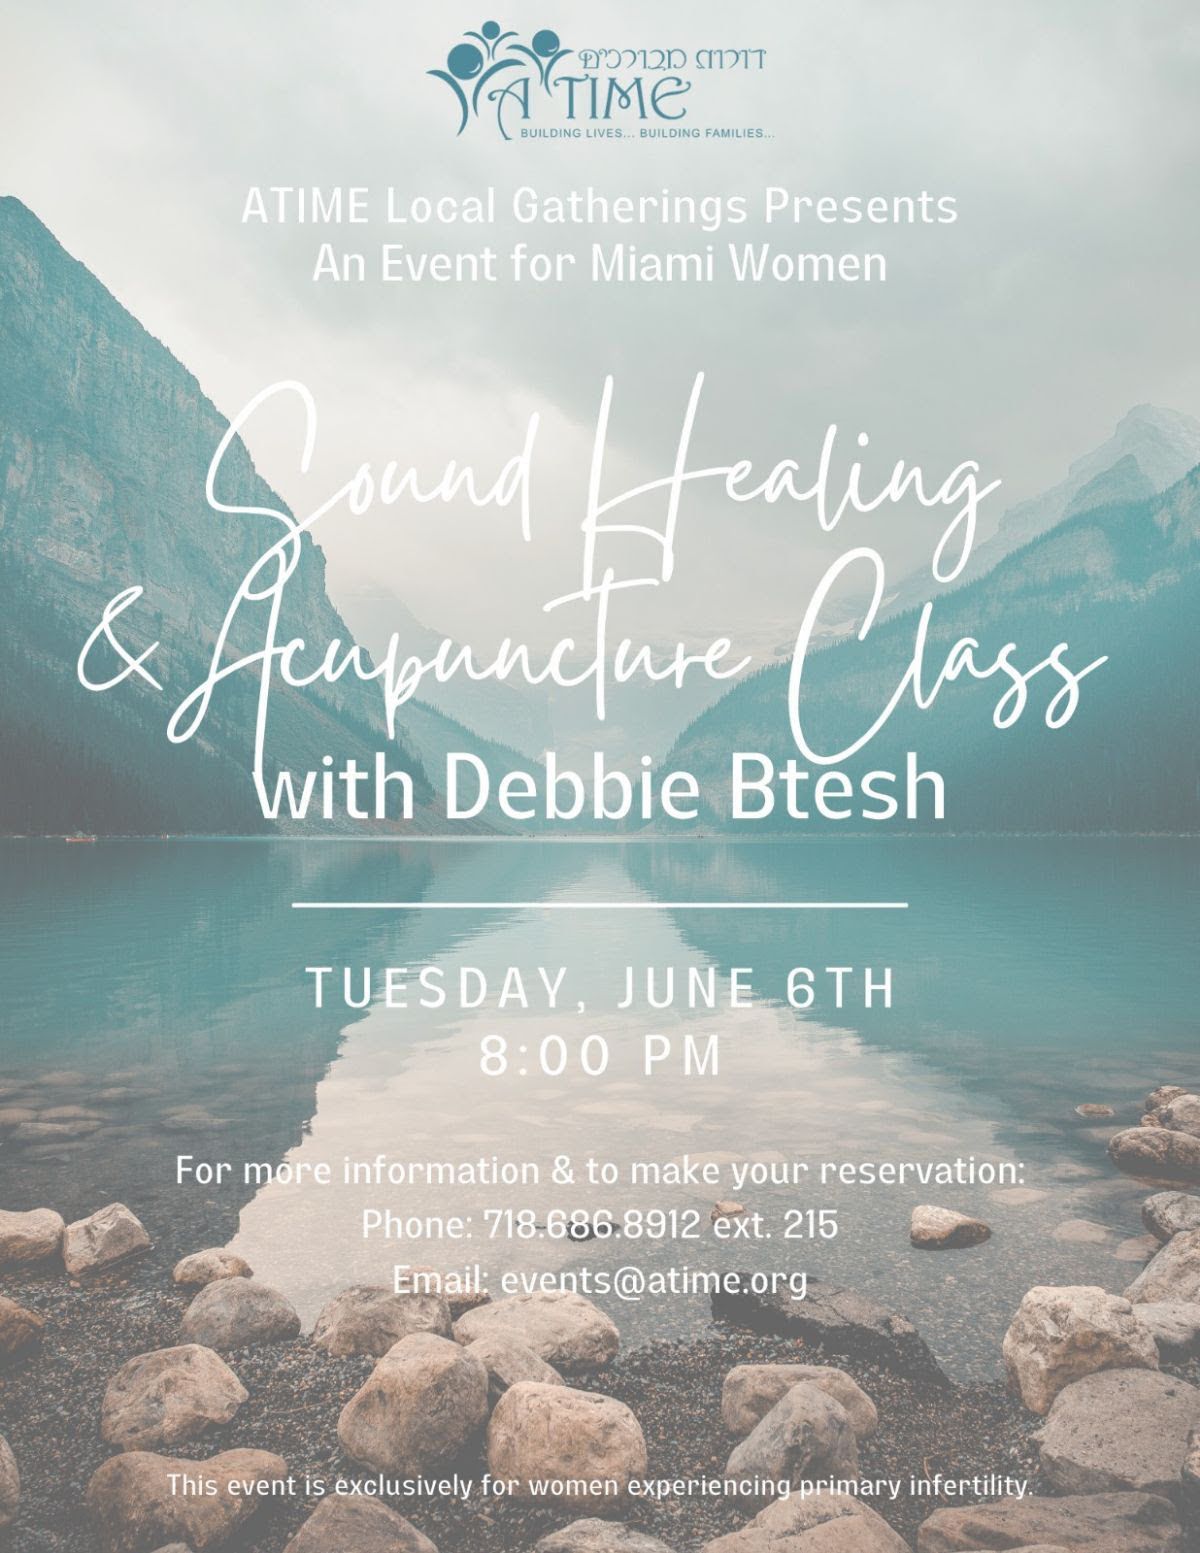 Sound Healing and Acupuncture Class with Debbie Btesh